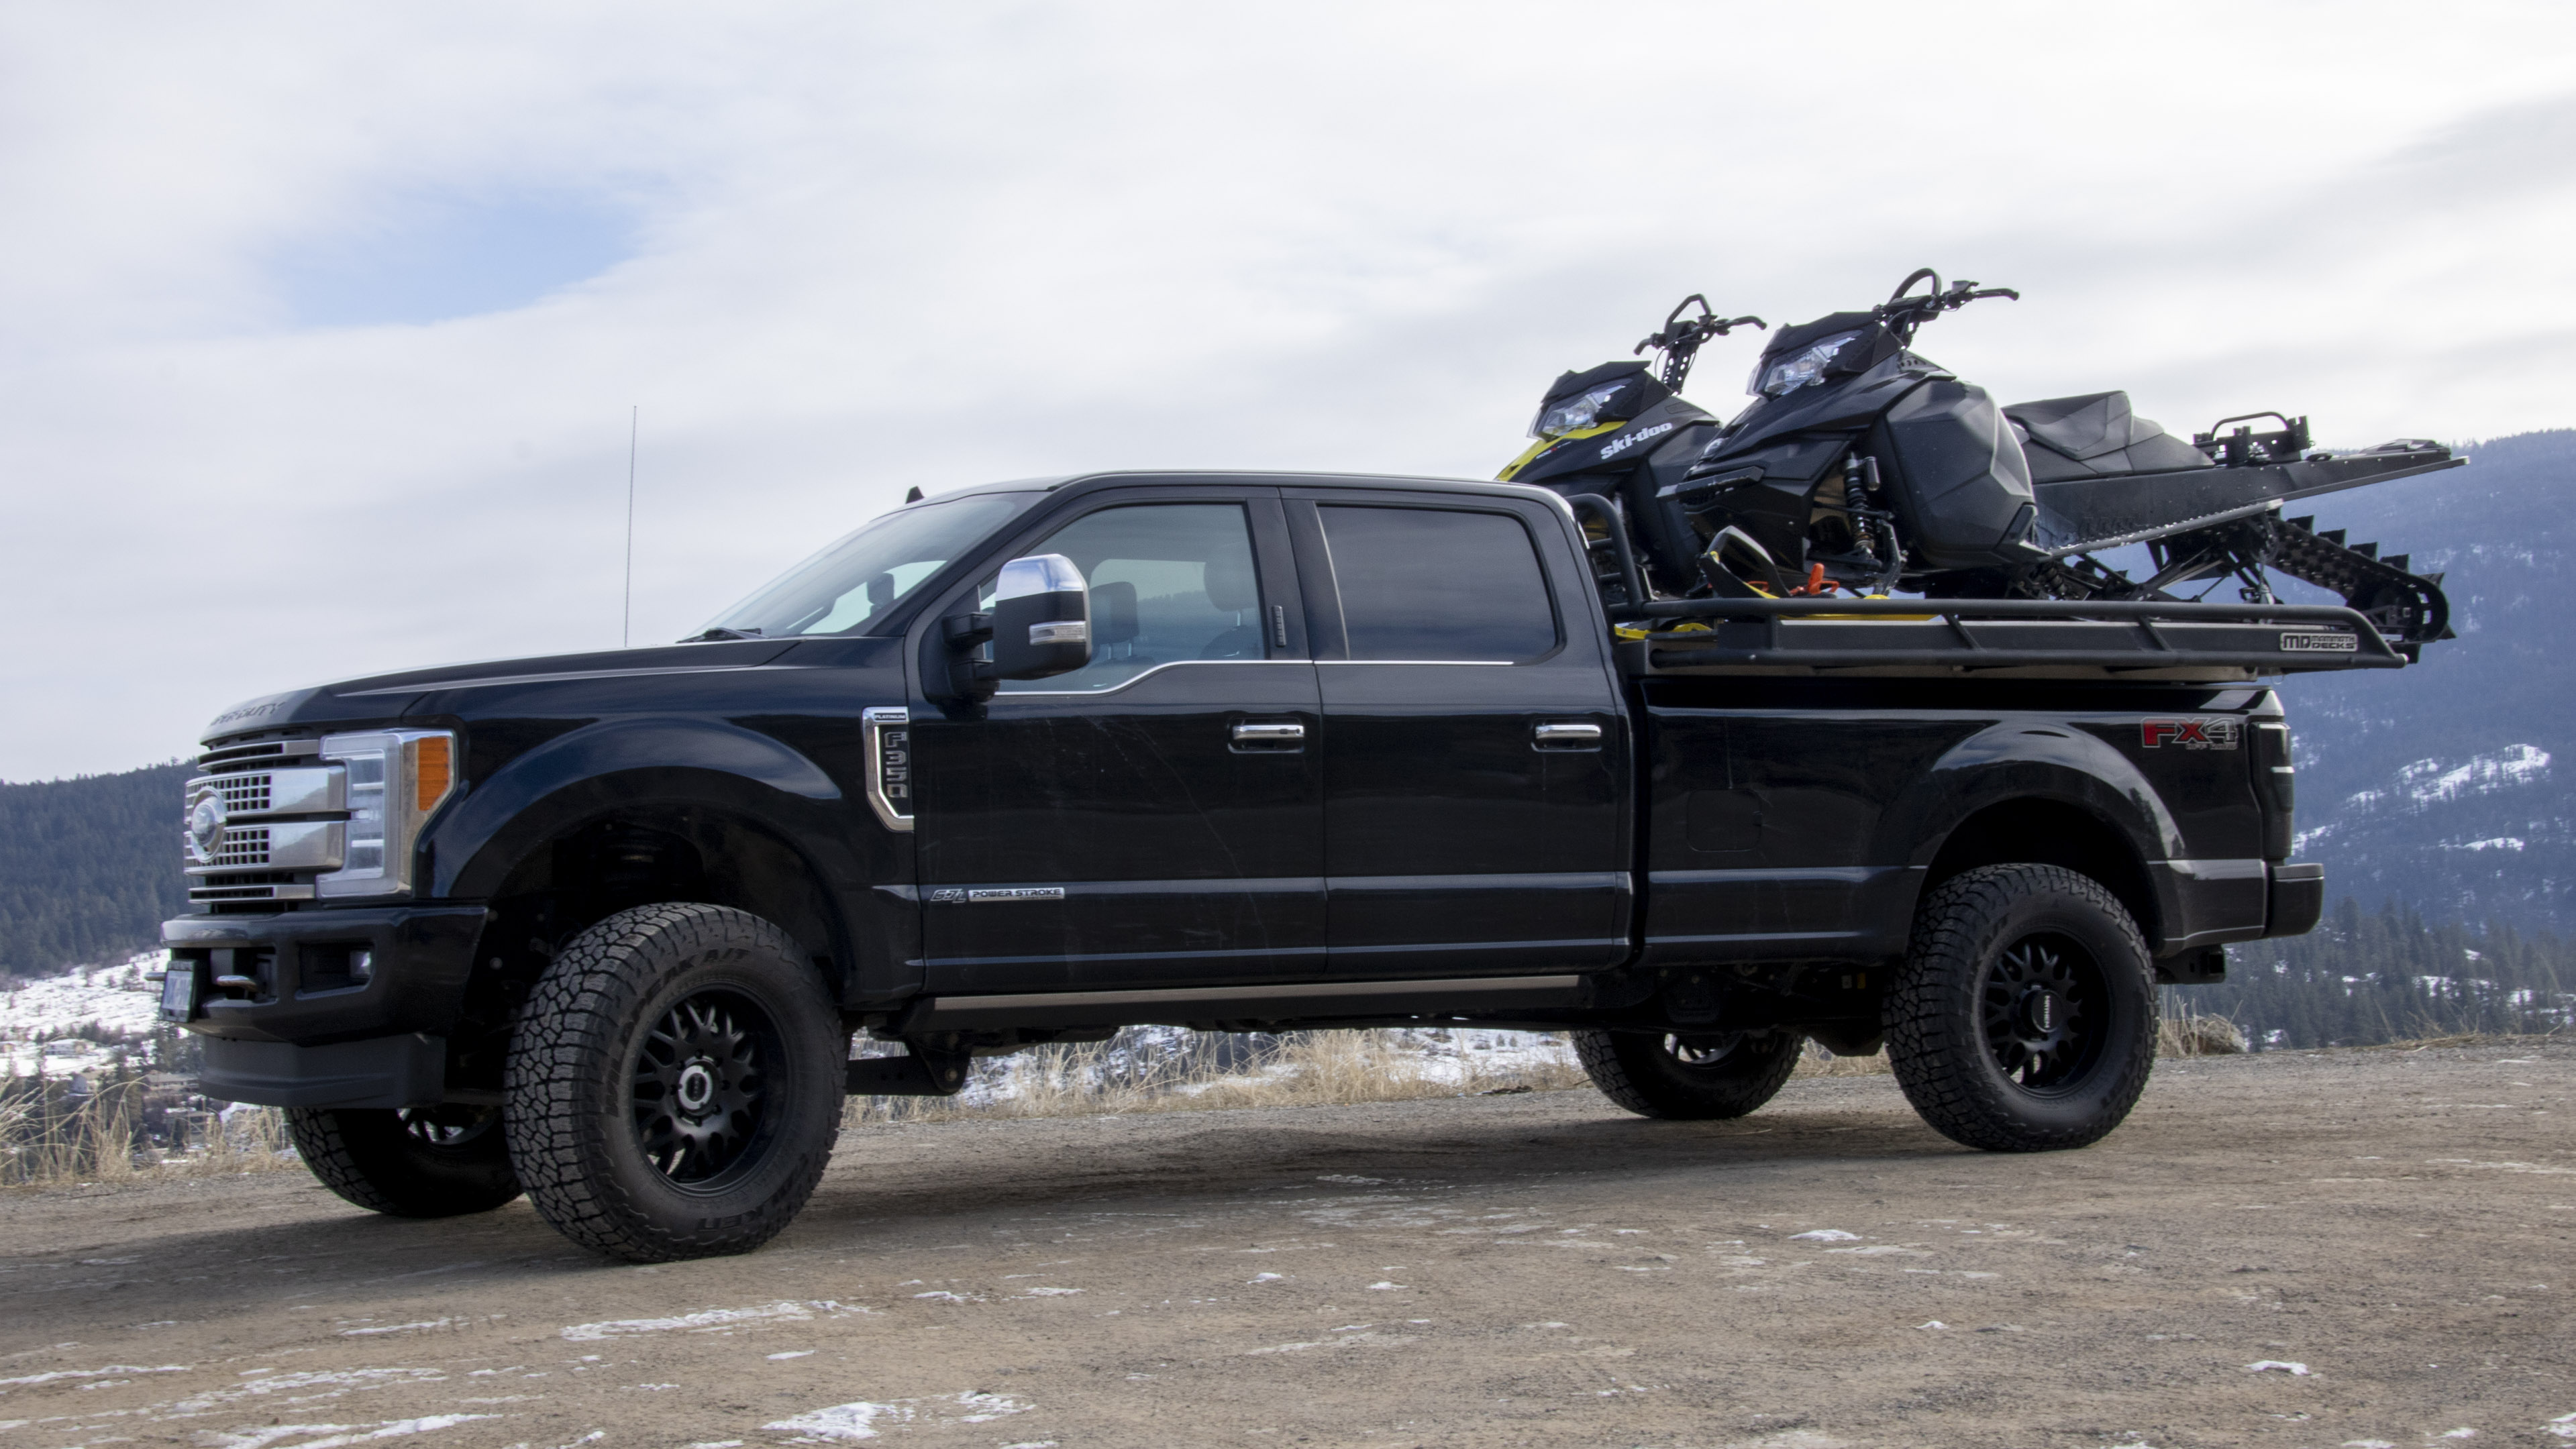 Ford F350 Full Sized Pickup Truck with long bed transporting 2 sleds on the back